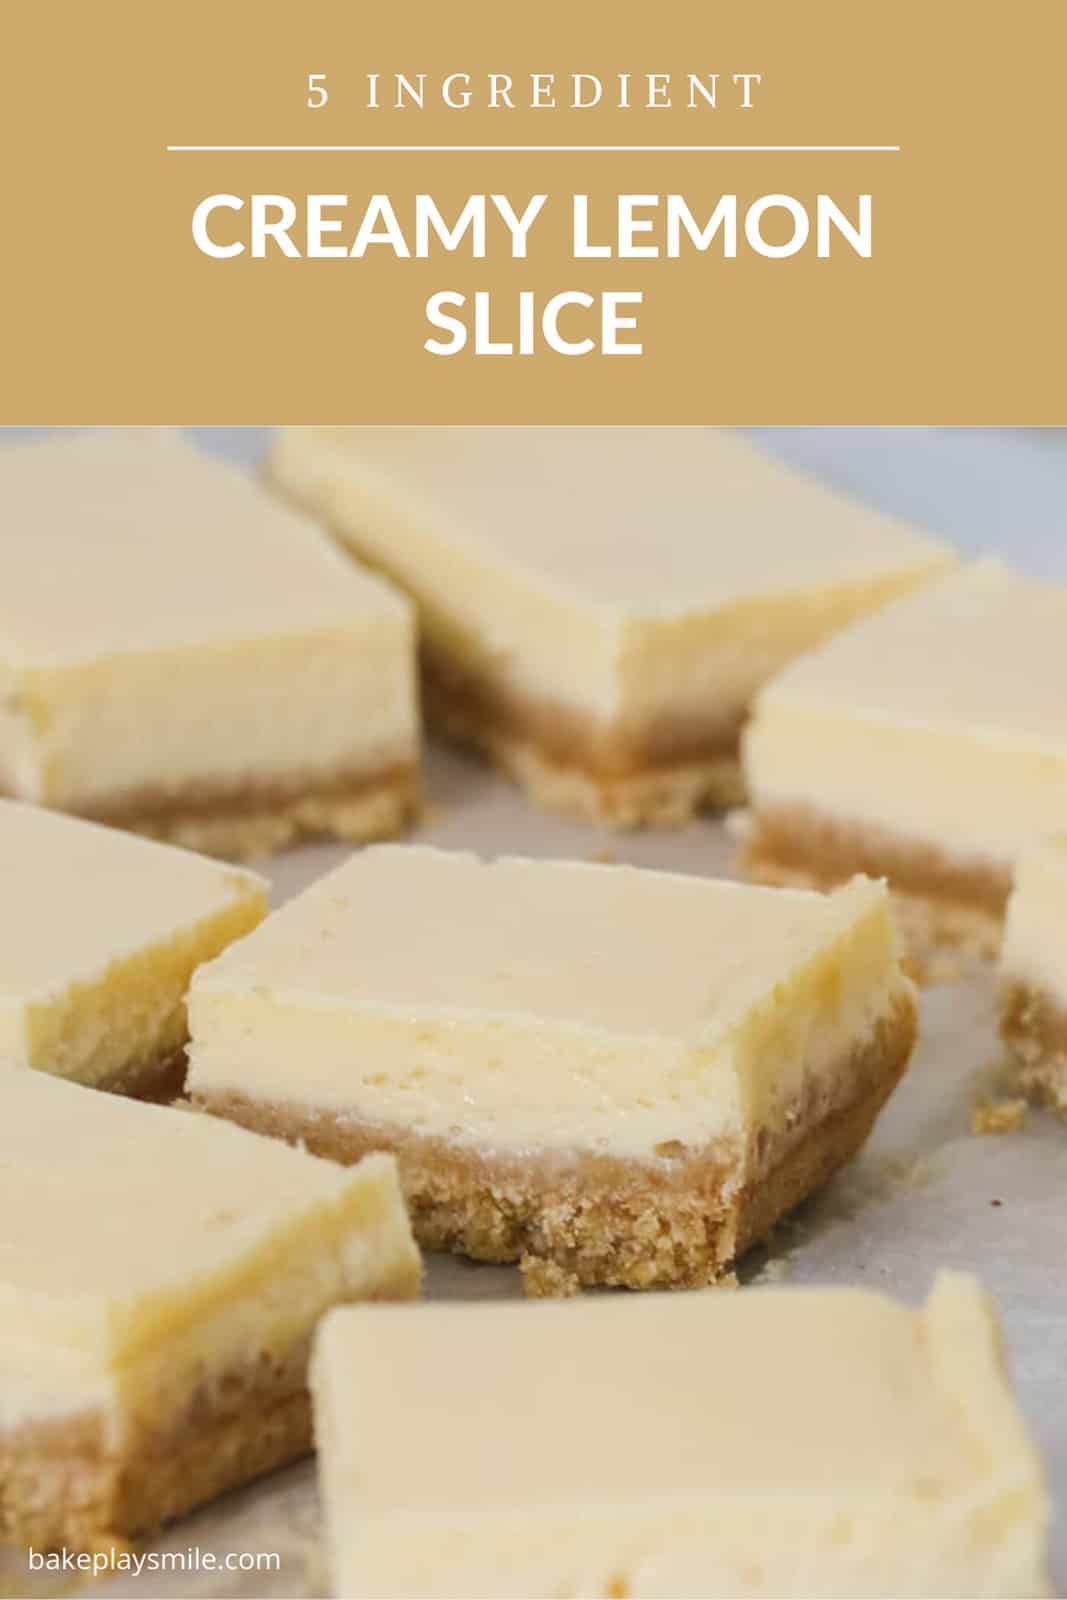 A creamy lemon slice with a biscuit base cut into squares